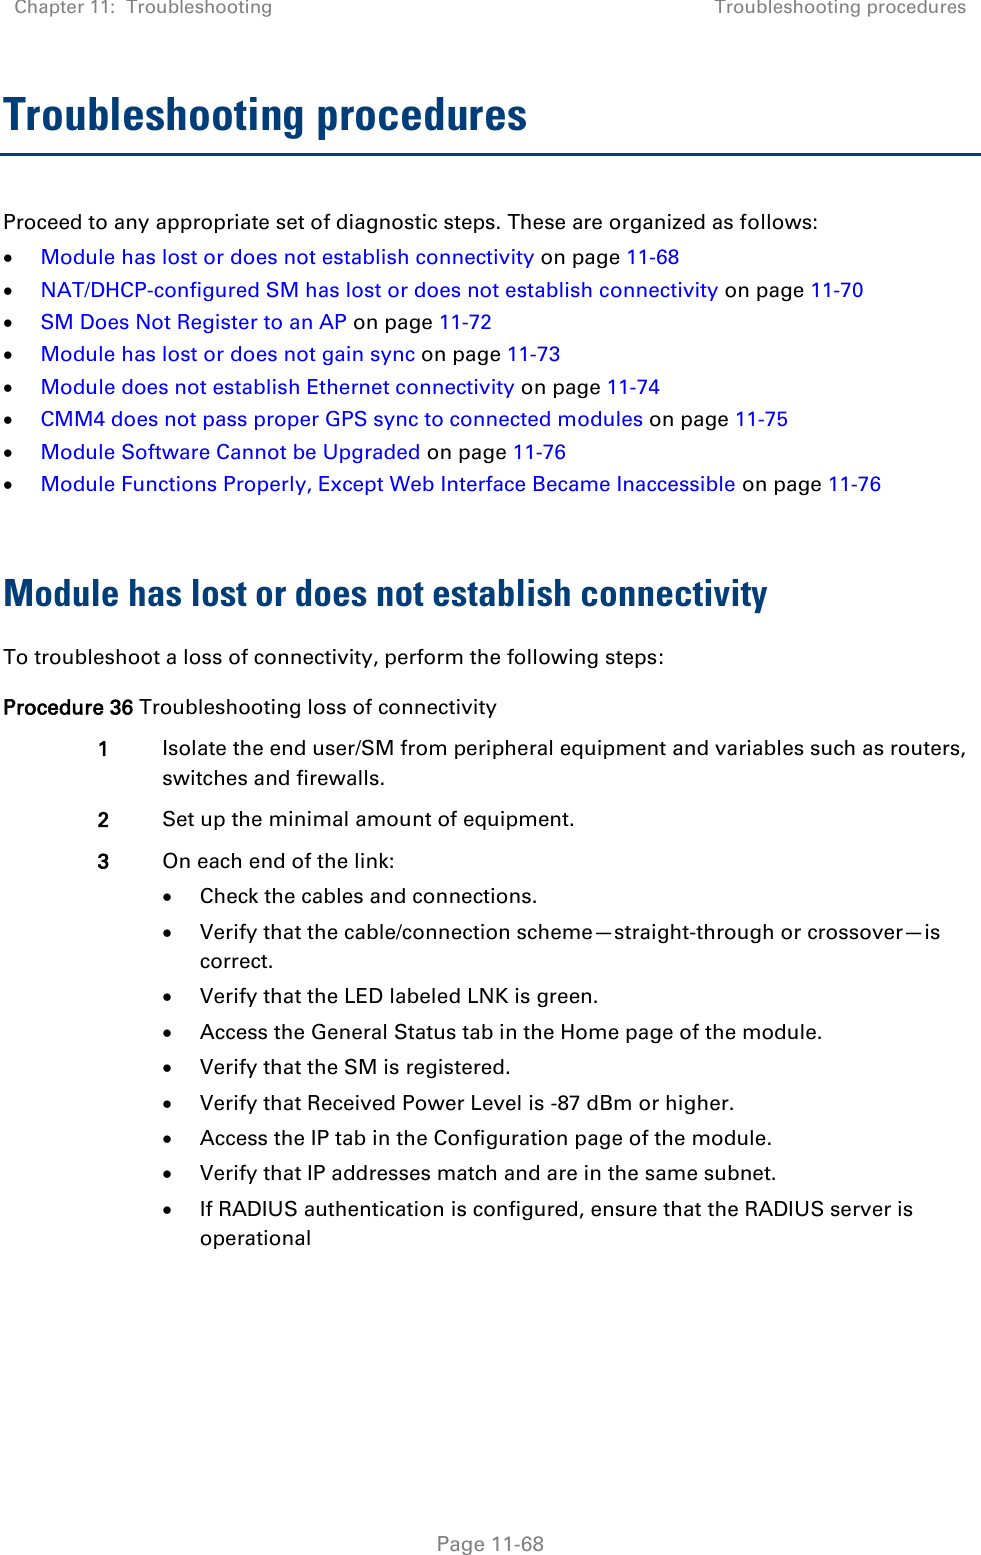 Chapter 11:  Troubleshooting Troubleshooting procedures   Page 11-68 Troubleshooting procedures Proceed to any appropriate set of diagnostic steps. These are organized as follows:  Module has lost or does not establish connectivity on page 11-68  NAT/DHCP-configured SM has lost or does not establish connectivity on page 11-70  SM Does Not Register to an AP on page 11-72  Module has lost or does not gain sync on page 11-73  Module does not establish Ethernet connectivity on page 11-74  CMM4 does not pass proper GPS sync to connected modules on page 11-75  Module Software Cannot be Upgraded on page 11-76  Module Functions Properly, Except Web Interface Became Inaccessible on page 11-76  Module has lost or does not establish connectivity To troubleshoot a loss of connectivity, perform the following steps: Procedure 36 Troubleshooting loss of connectivity 1 Isolate the end user/SM from peripheral equipment and variables such as routers, switches and firewalls.  2 Set up the minimal amount of equipment. 3 On each end of the link:  Check the cables and connections.  Verify that the cable/connection scheme—straight-through or crossover—is correct.  Verify that the LED labeled LNK is green.  Access the General Status tab in the Home page of the module.  Verify that the SM is registered.  Verify that Received Power Level is -87 dBm or higher.  Access the IP tab in the Configuration page of the module.  Verify that IP addresses match and are in the same subnet.  If RADIUS authentication is configured, ensure that the RADIUS server is operational  